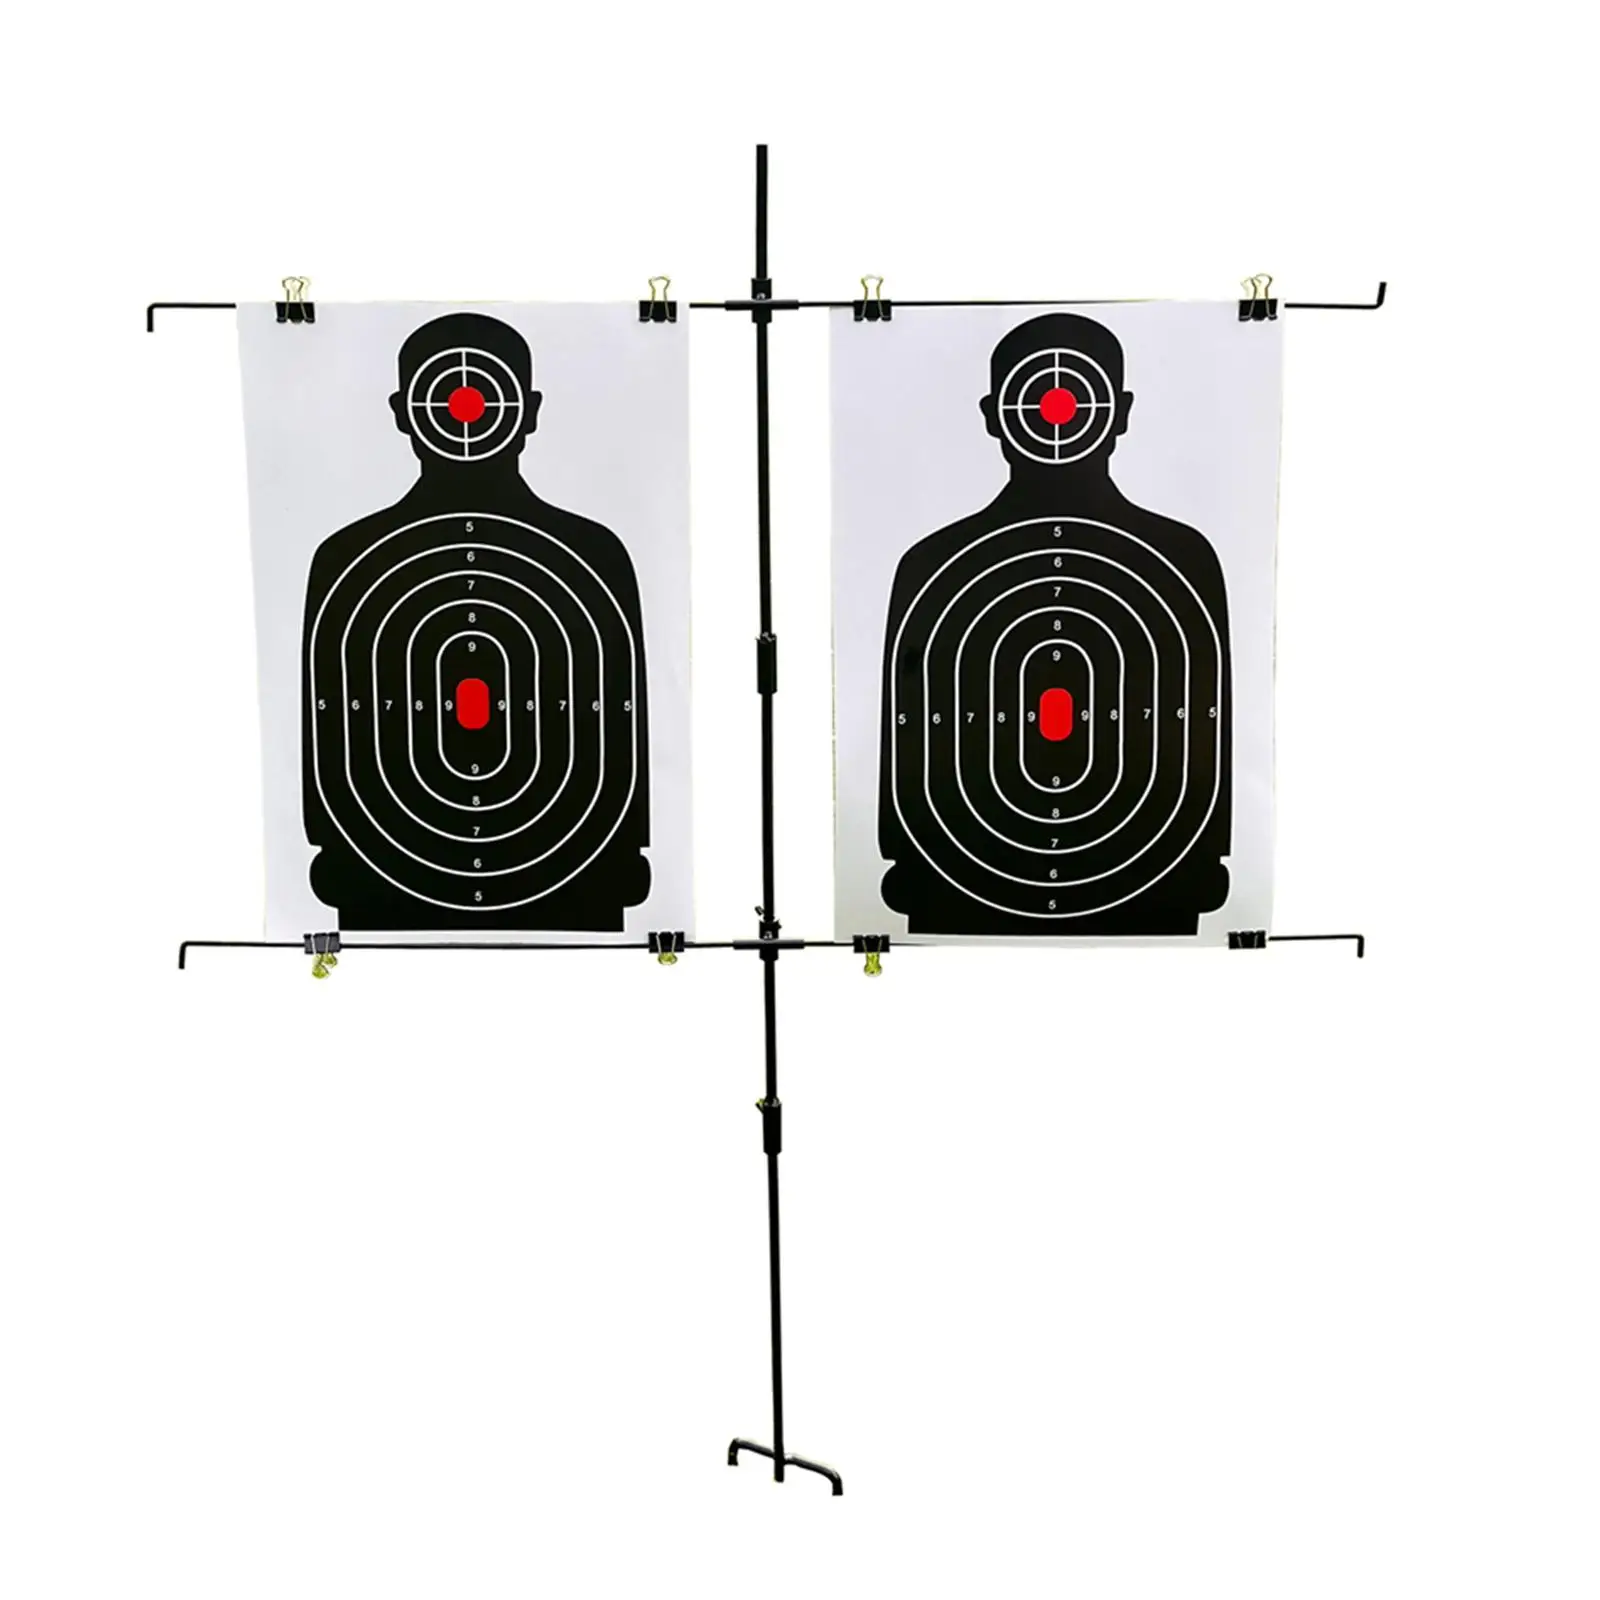 Adjustable Target Stand Holder Portable Outdoors Activities Durable for Range